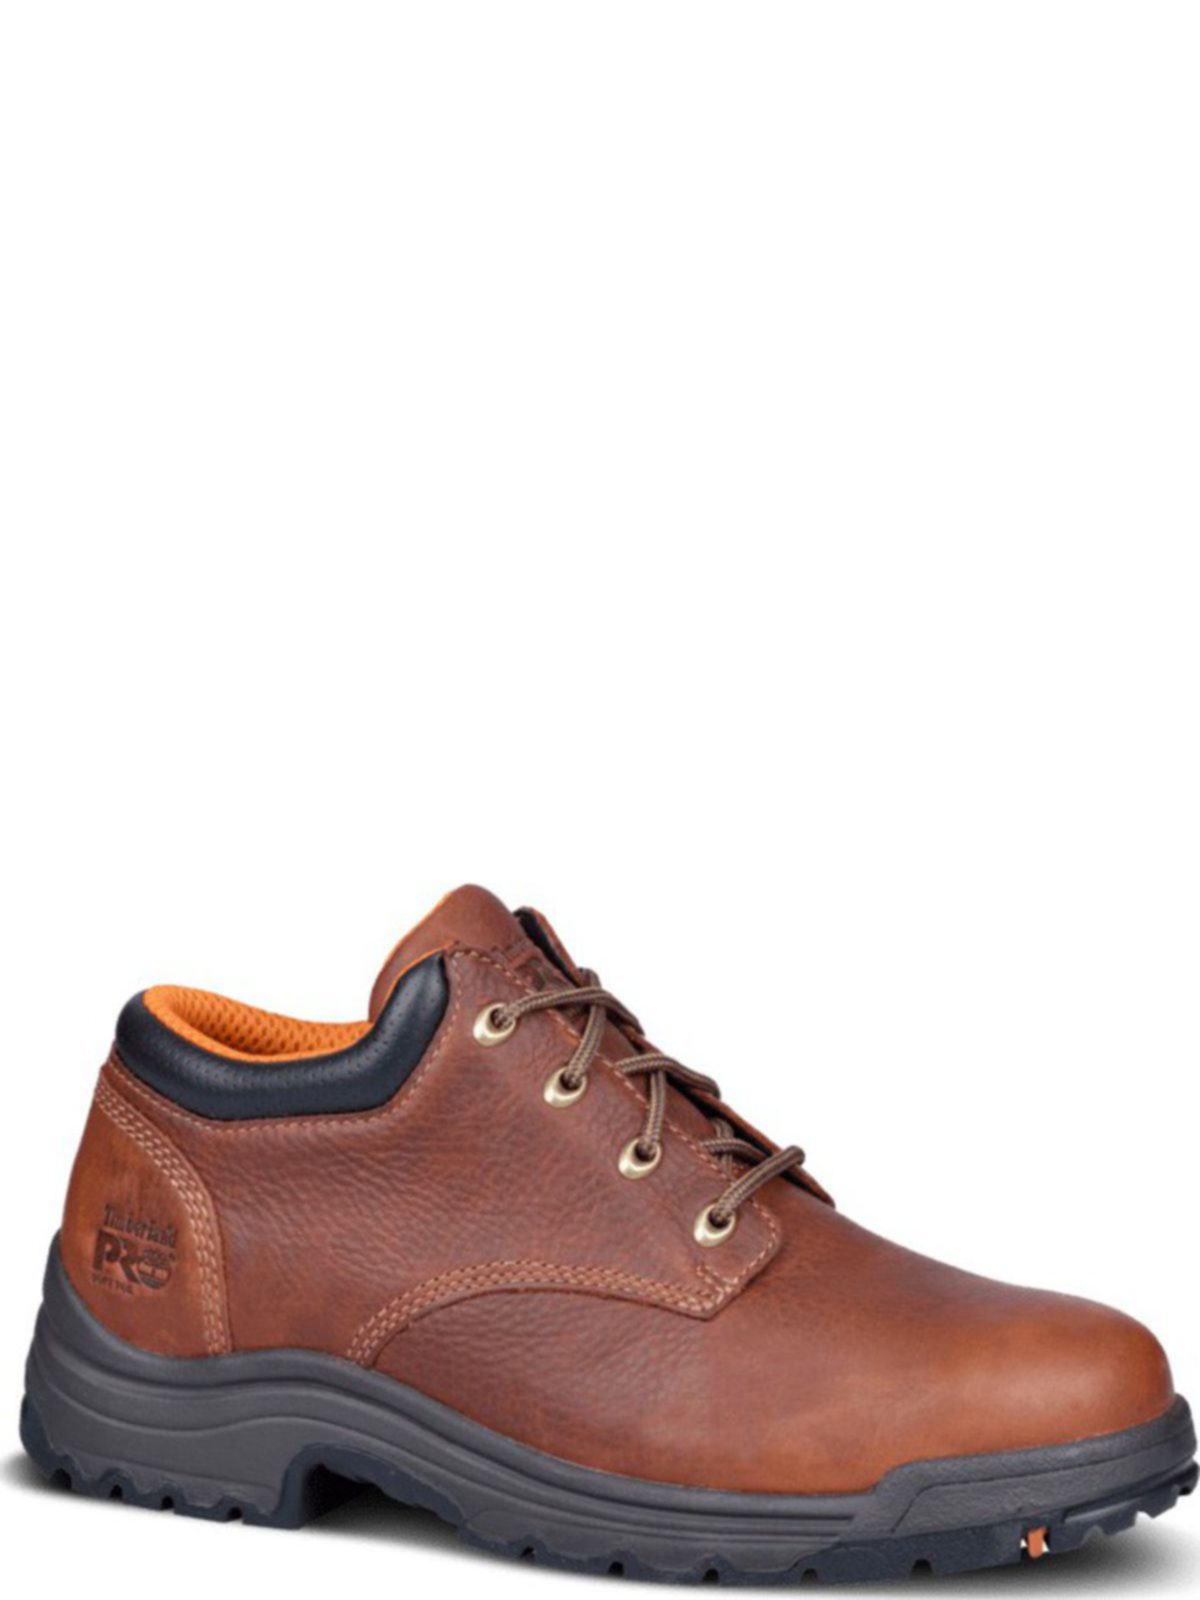 Timberland Pro Mens TITAN EH Work Shoes TB147015242